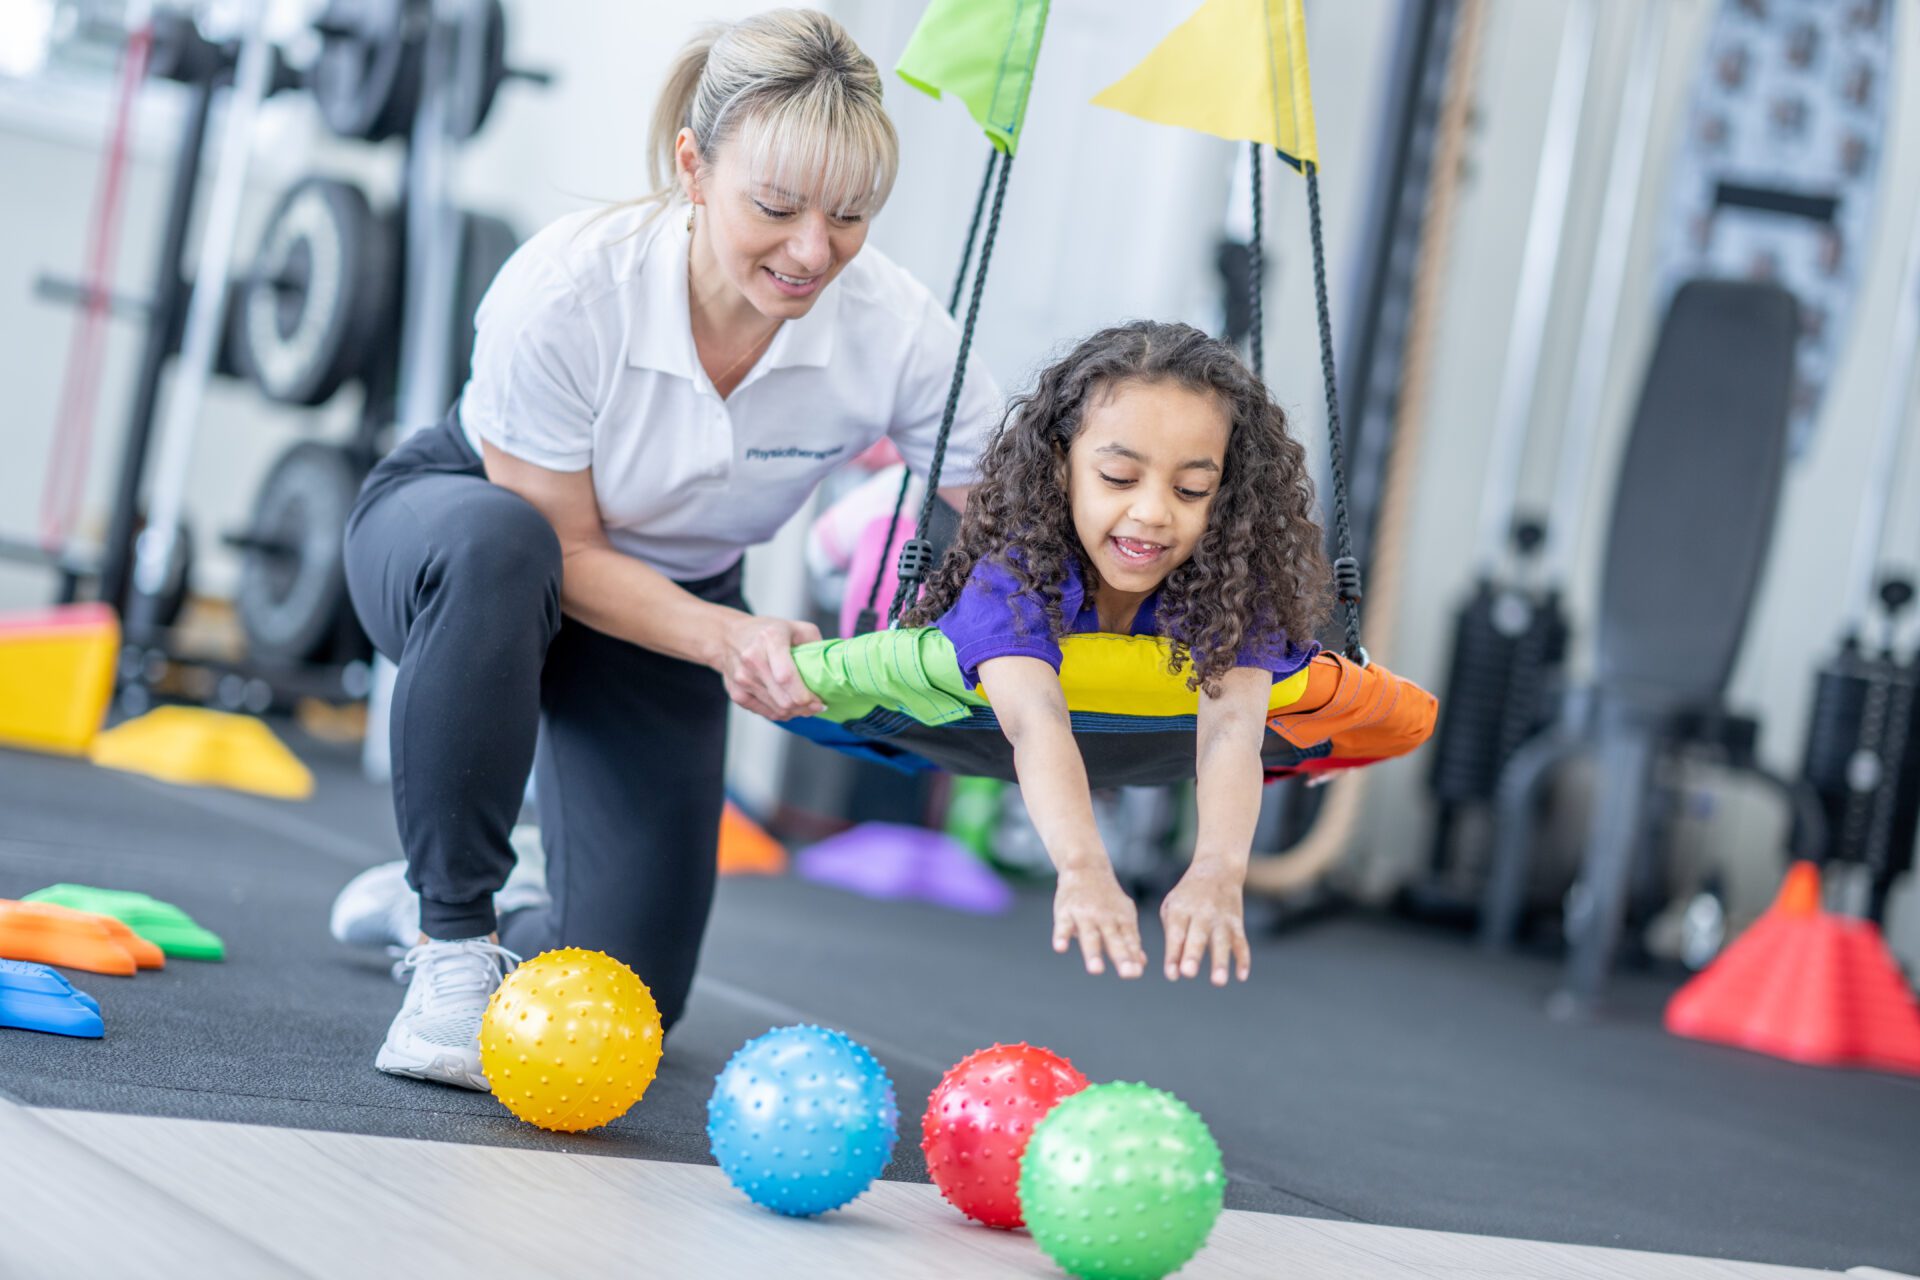 Sensory Integration and Processing, one of the Occupational Therapy (OT) services available at WITH Therapy Services